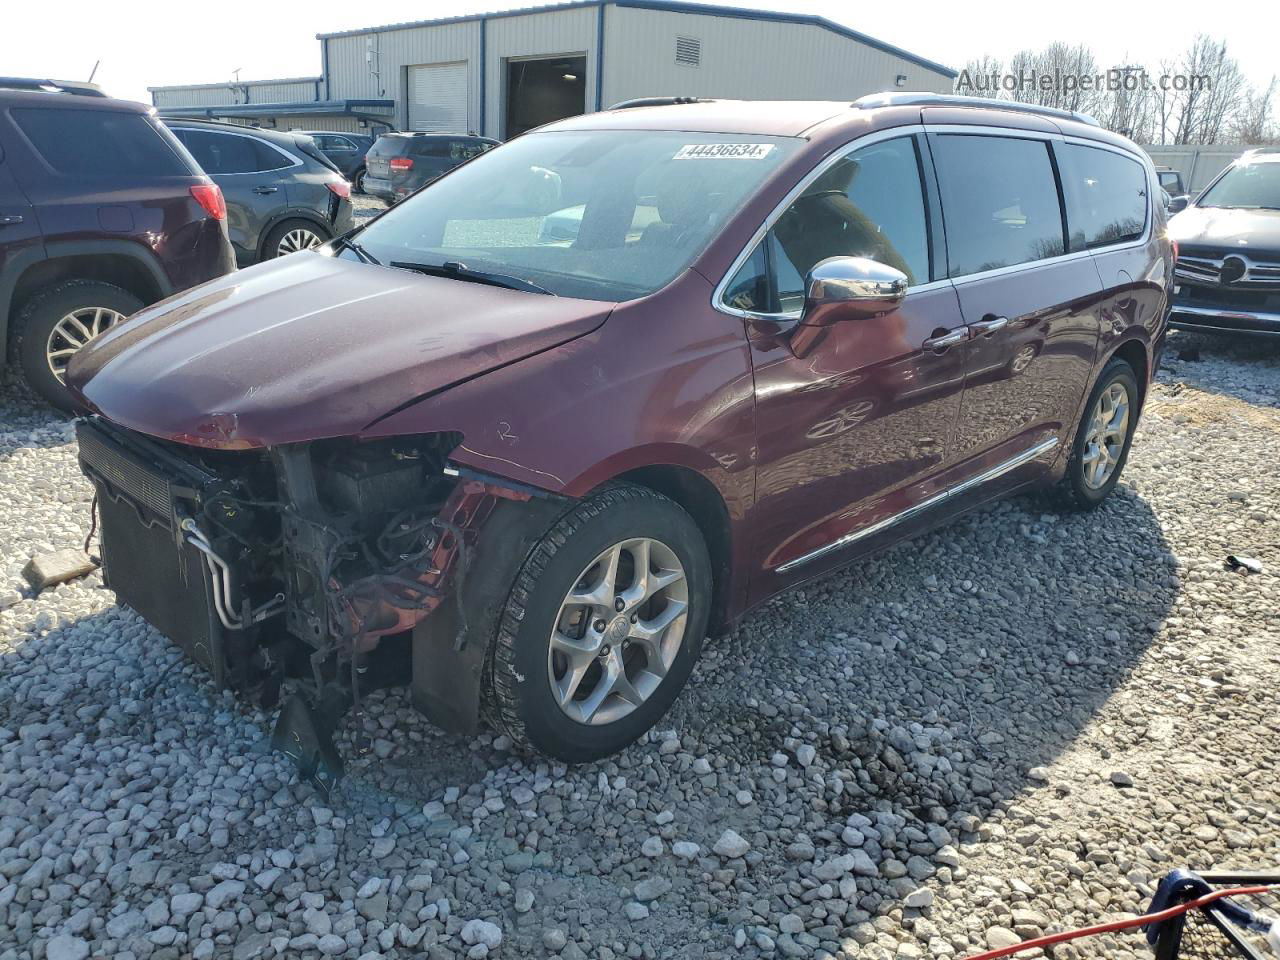 2017 Chrysler Pacifica Limited Maroon vin: 2C4RC1GG7HR528871